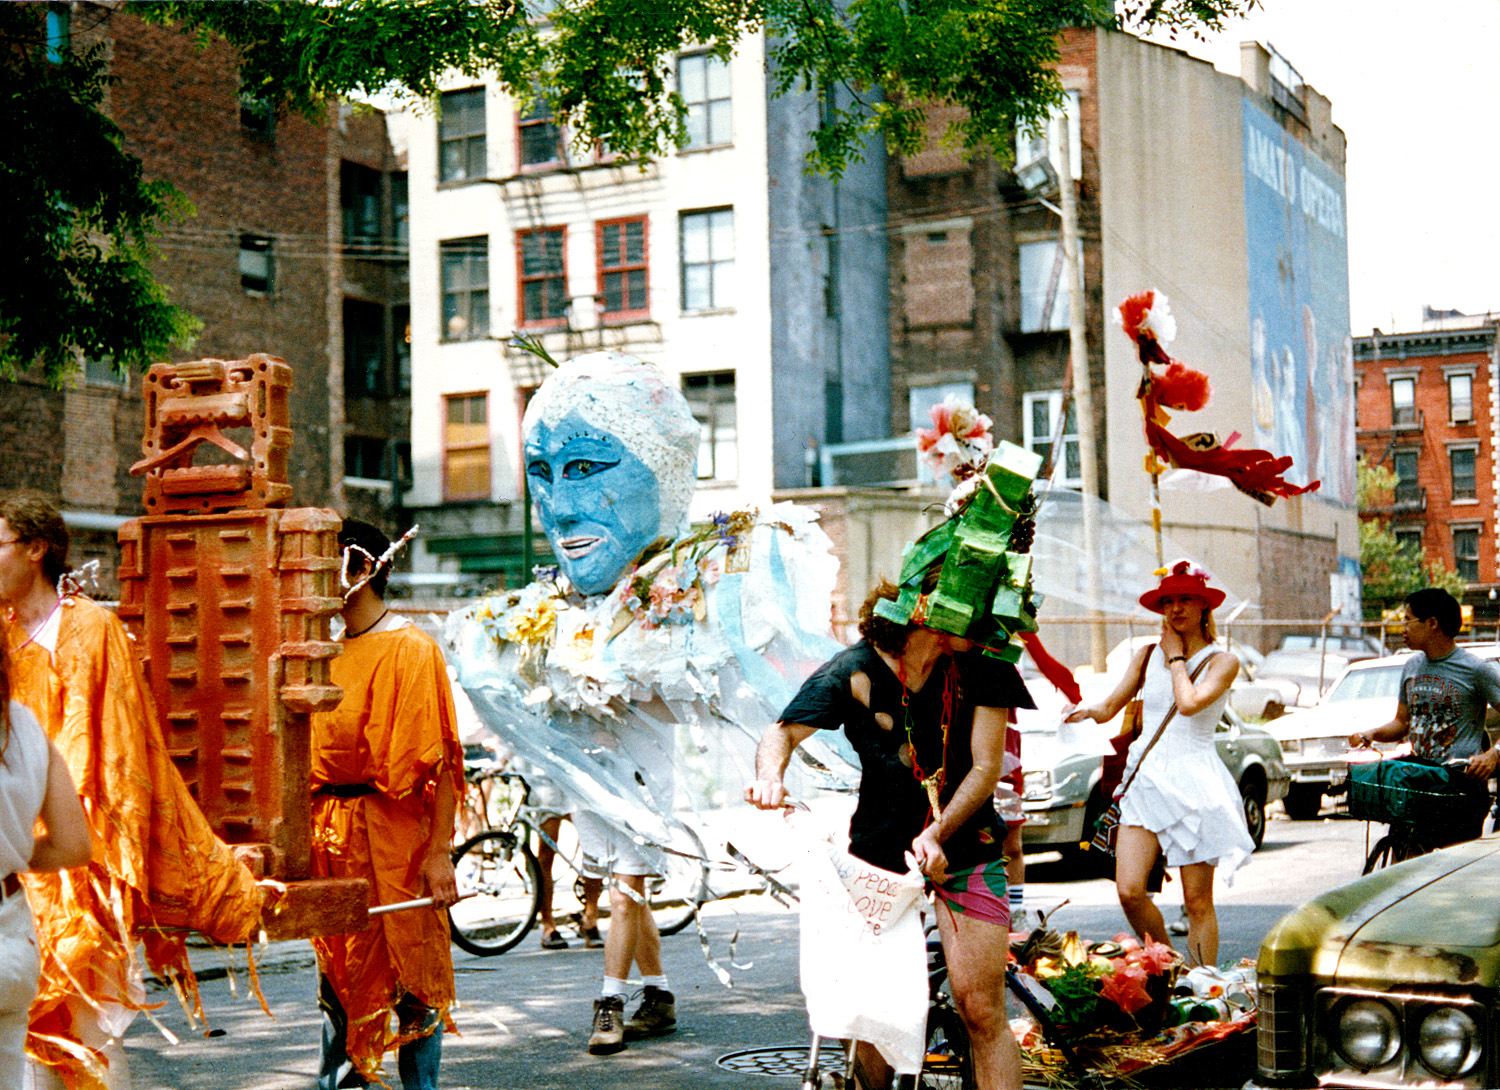  Giant puppets went on parade to support the community gardens of the East Village and Lower East Side. 